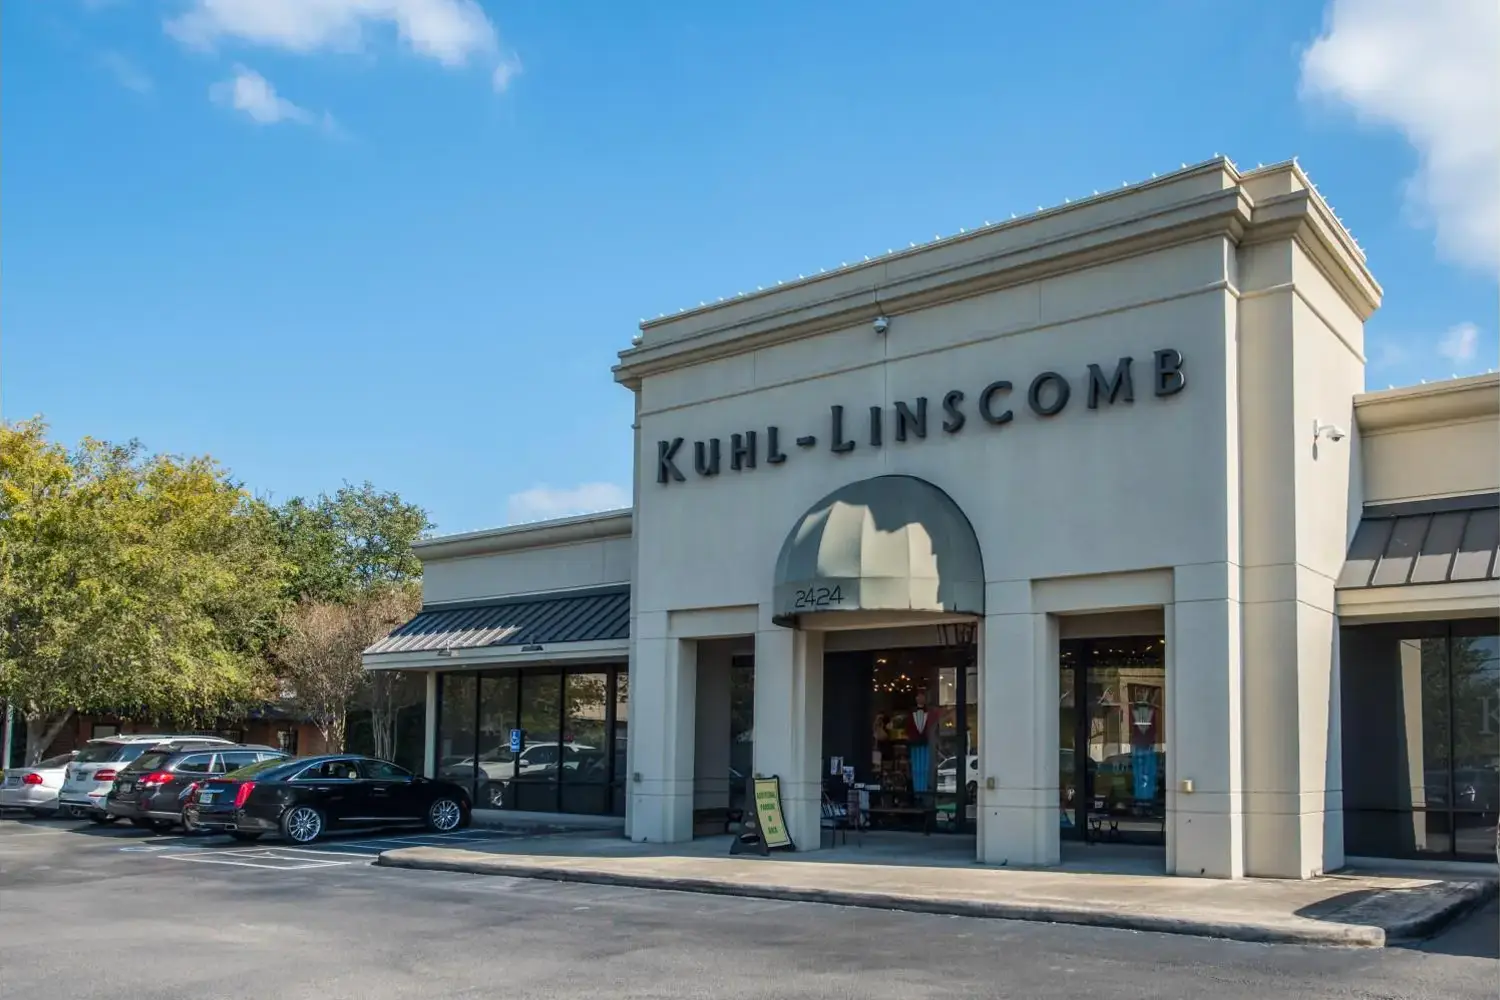 Modern storefront with a parking lot, featuring a sign reading ‘Kuhl-Linscomb’ and a large window on the right side of the entrance.